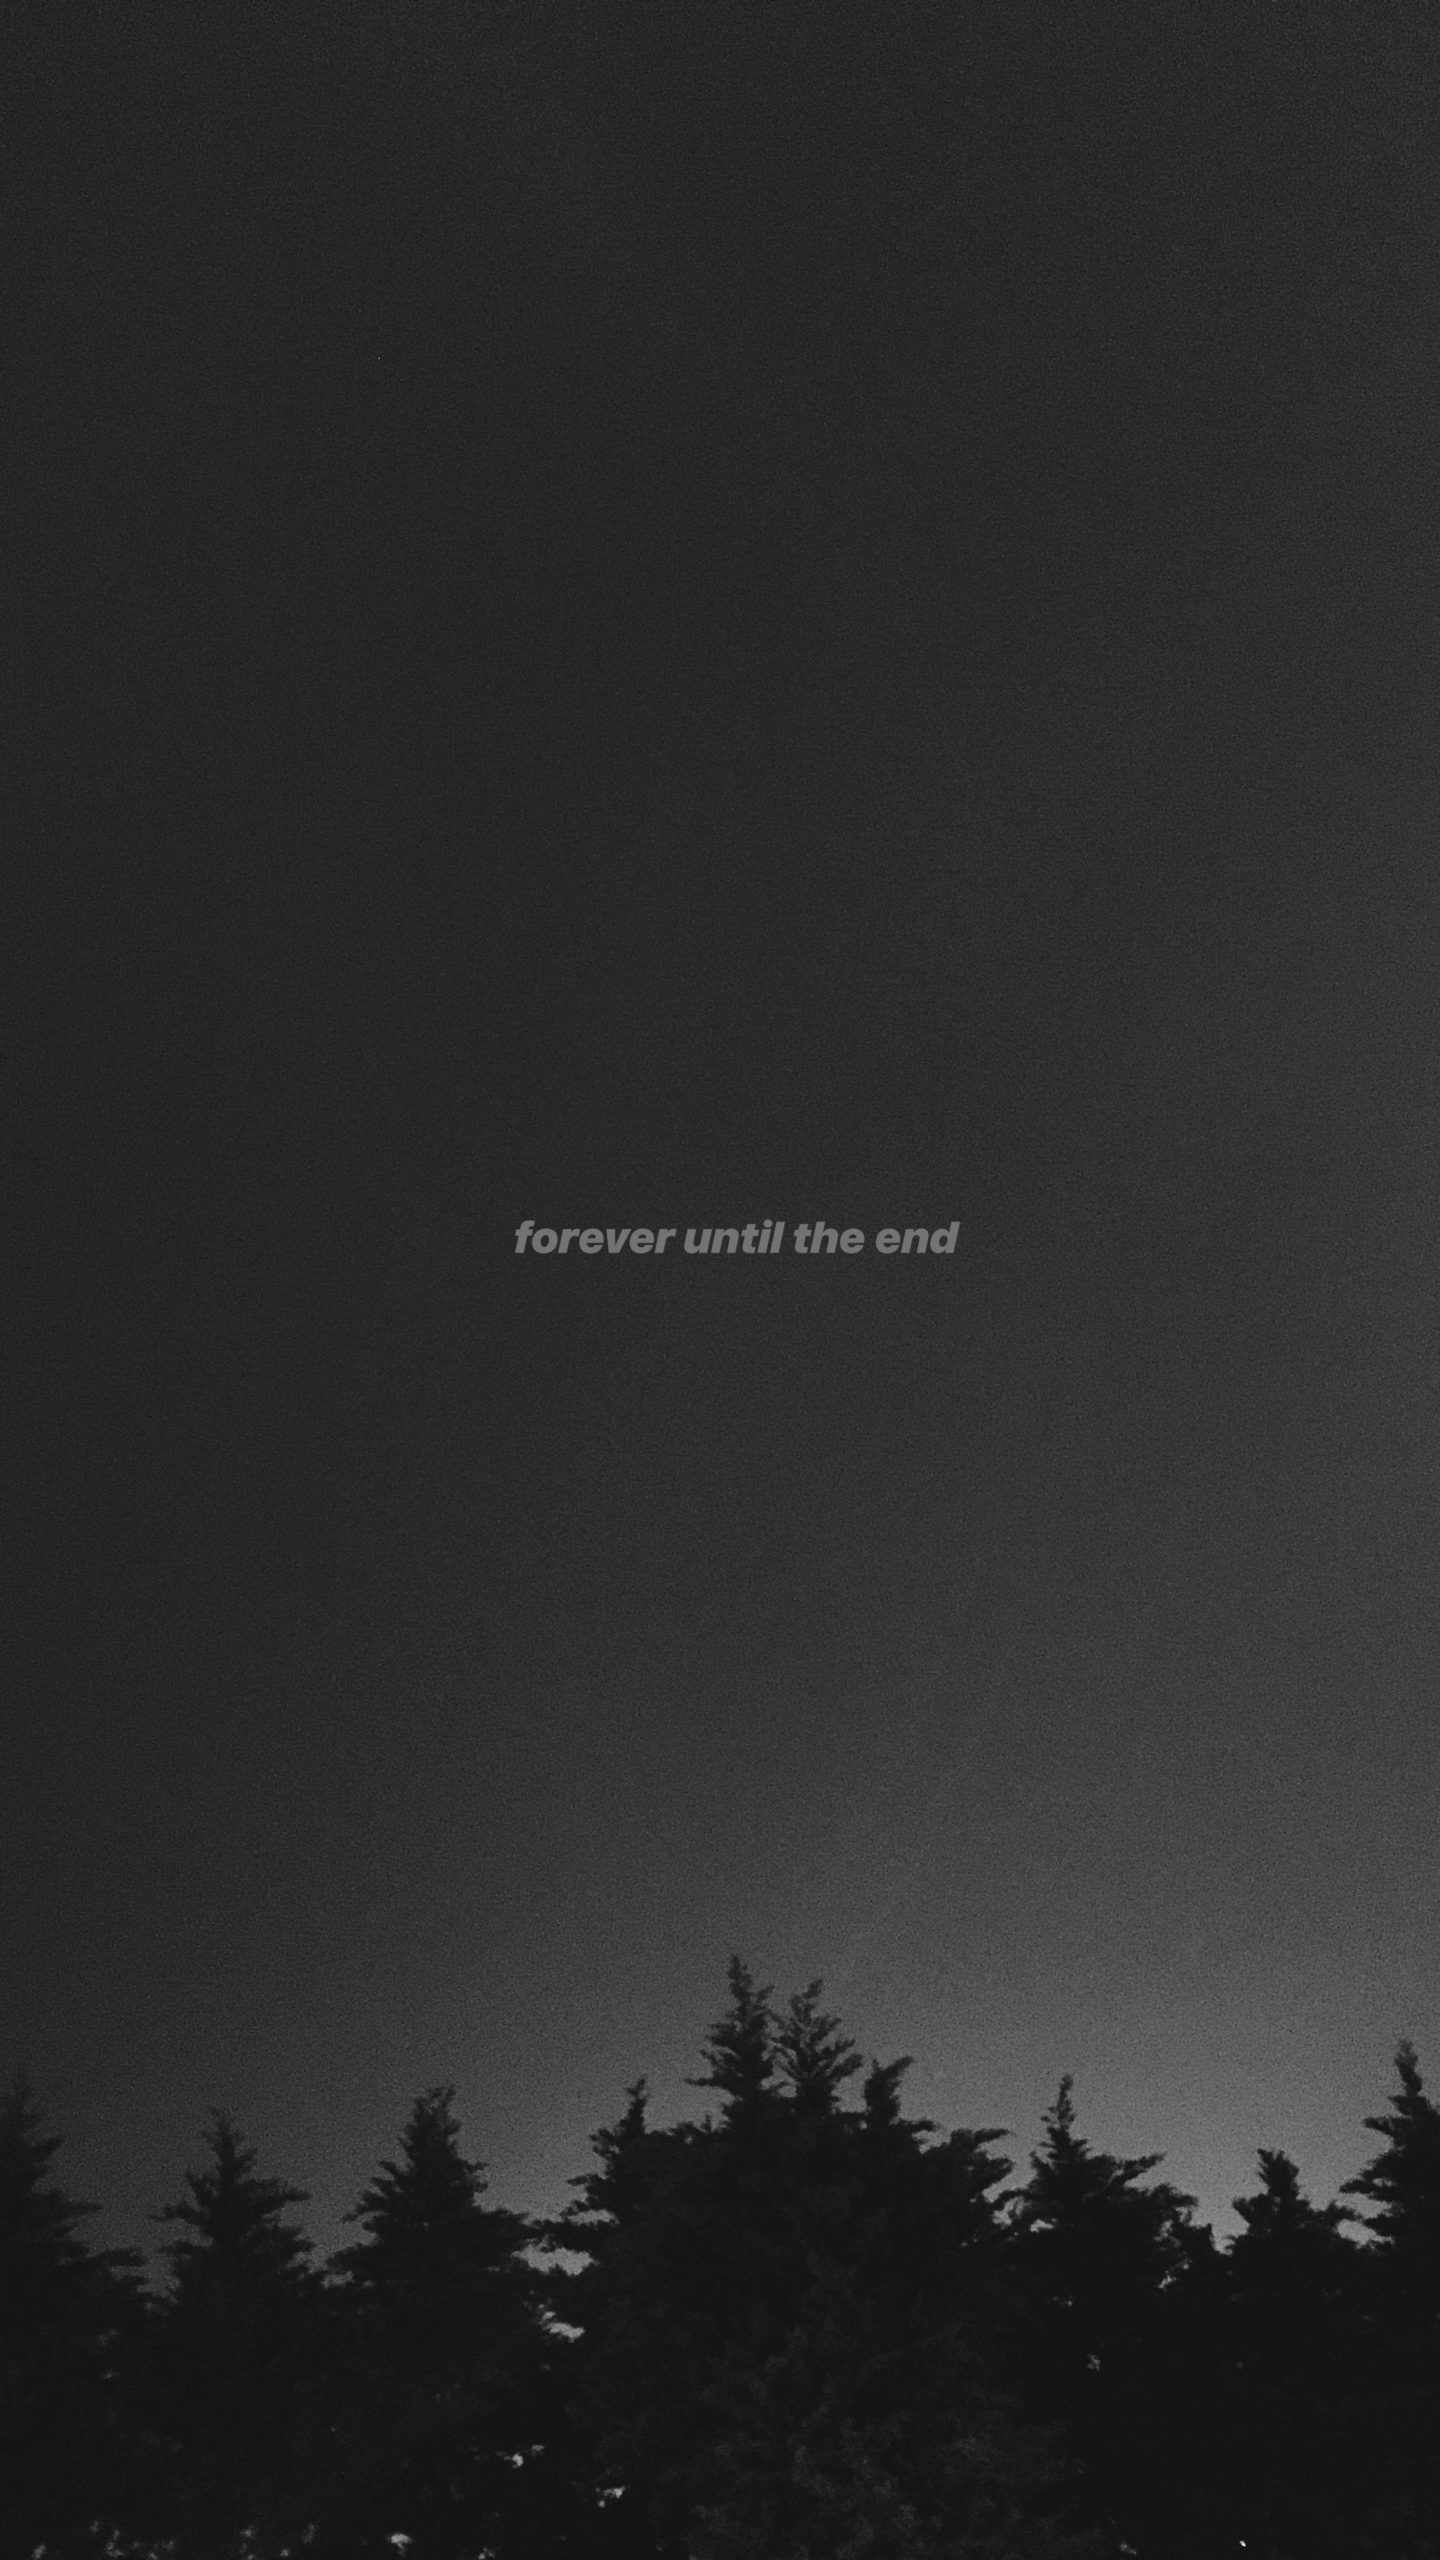 Sad aesthetic wallpaper, Forever until the end